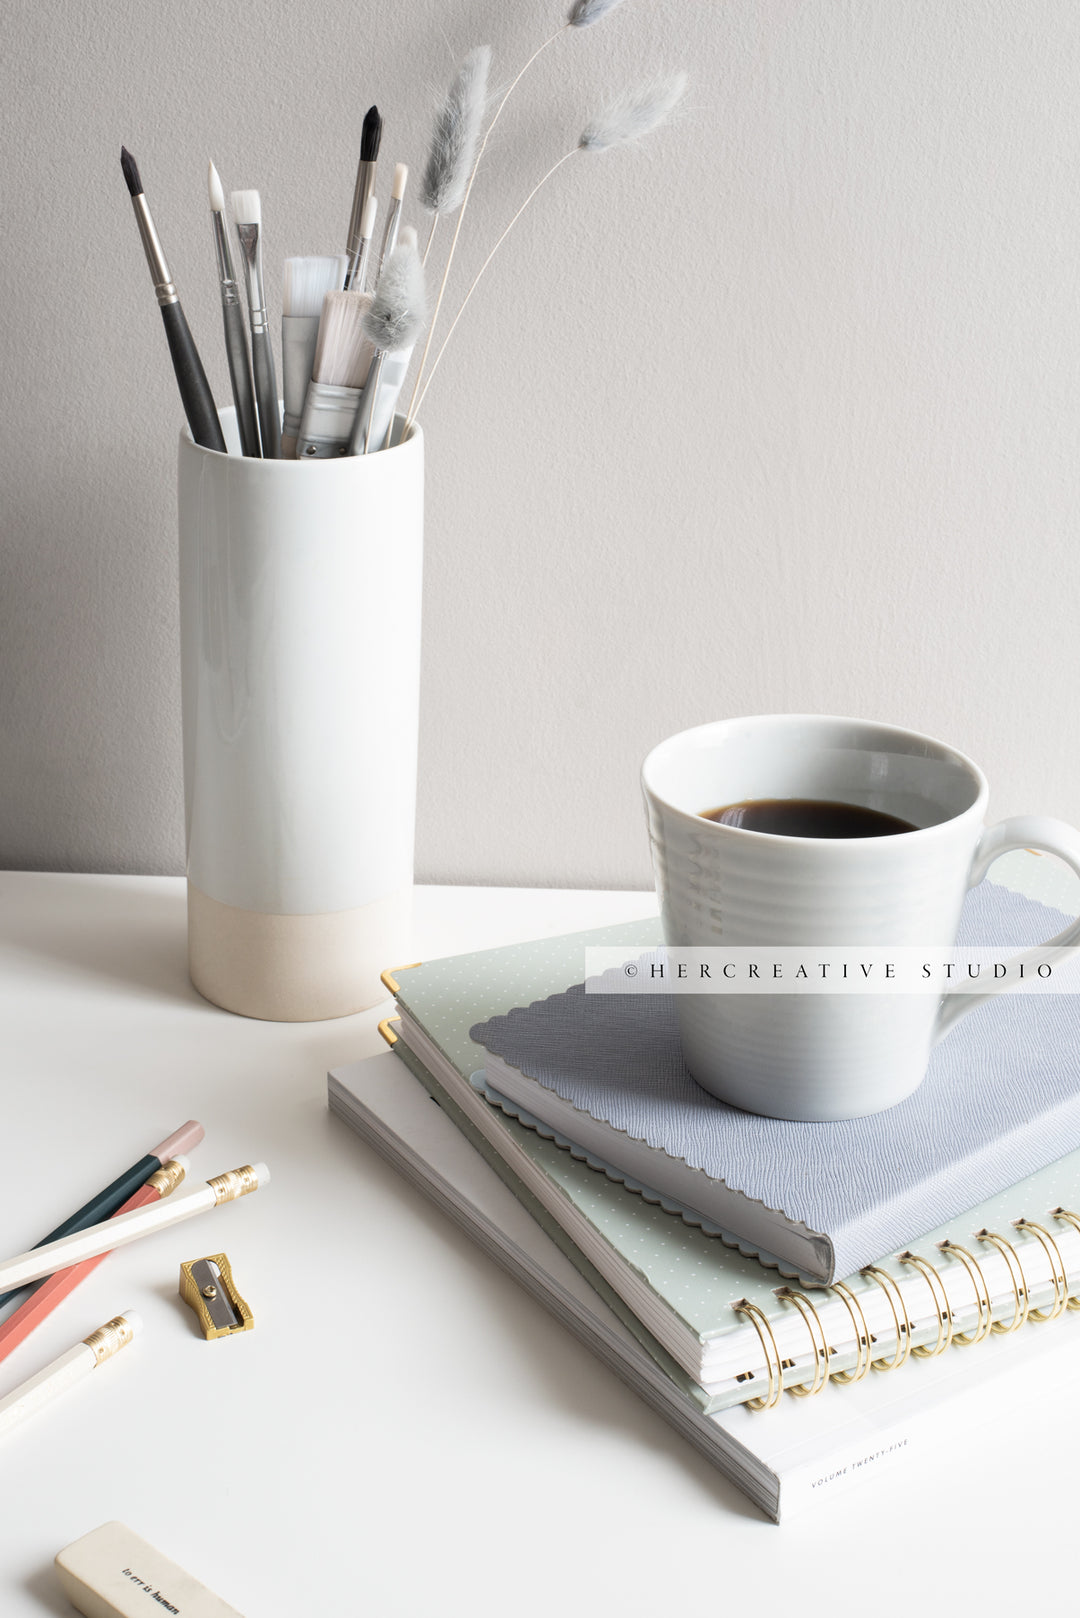 Coffee and Paintbrushes on Grey Workspace. Stock Image